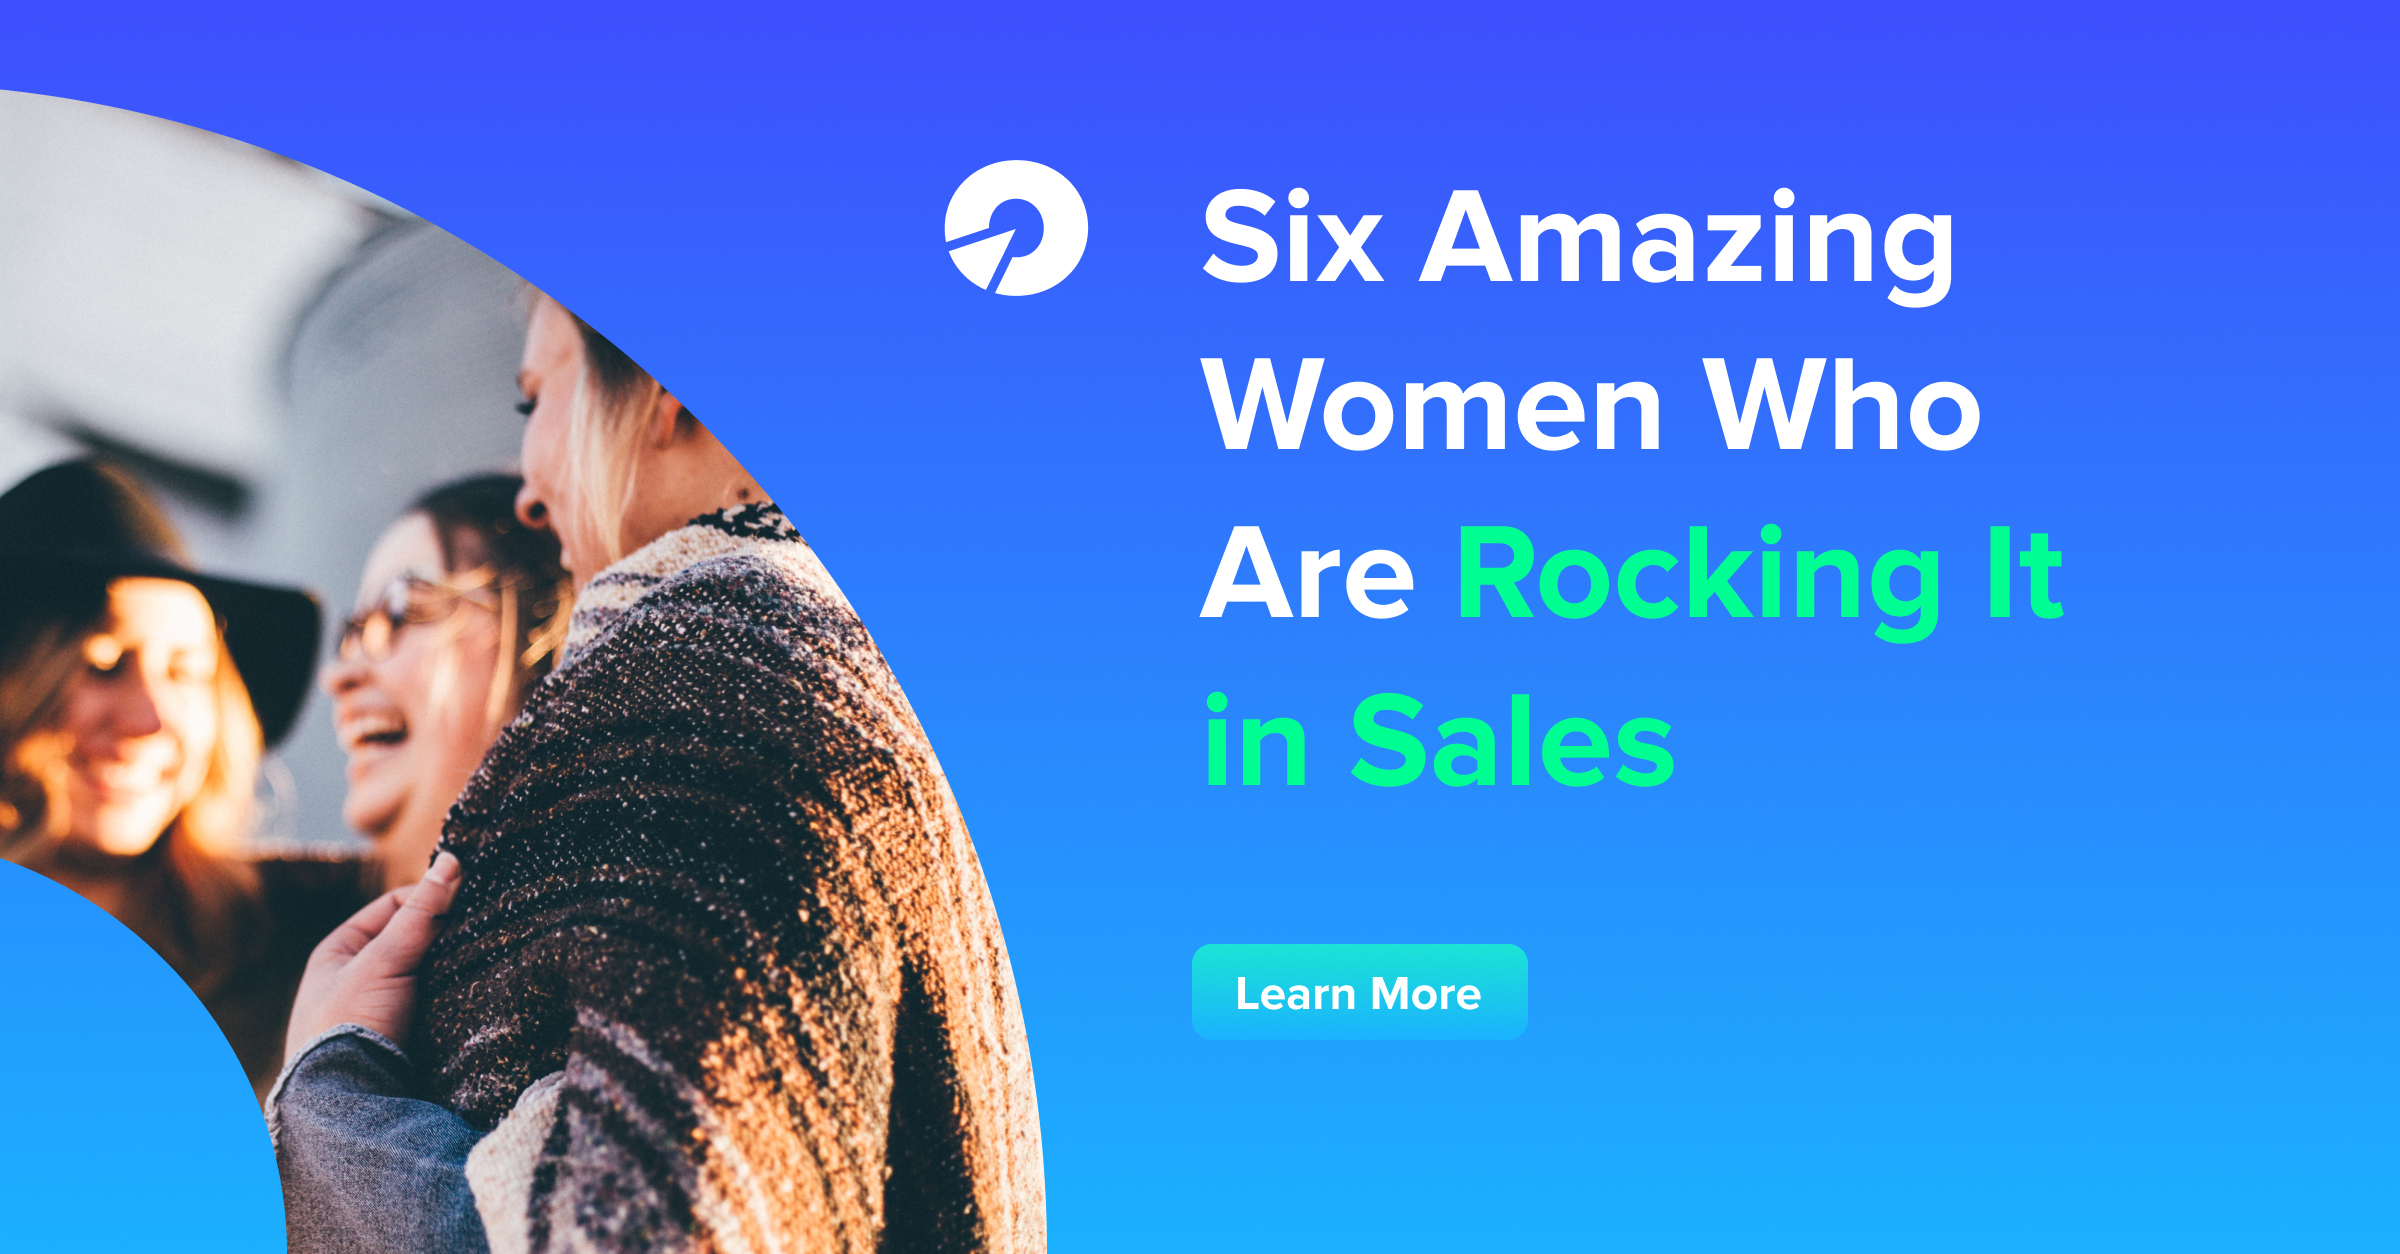 Six Amazing Women Who Are Rocking It in Sales